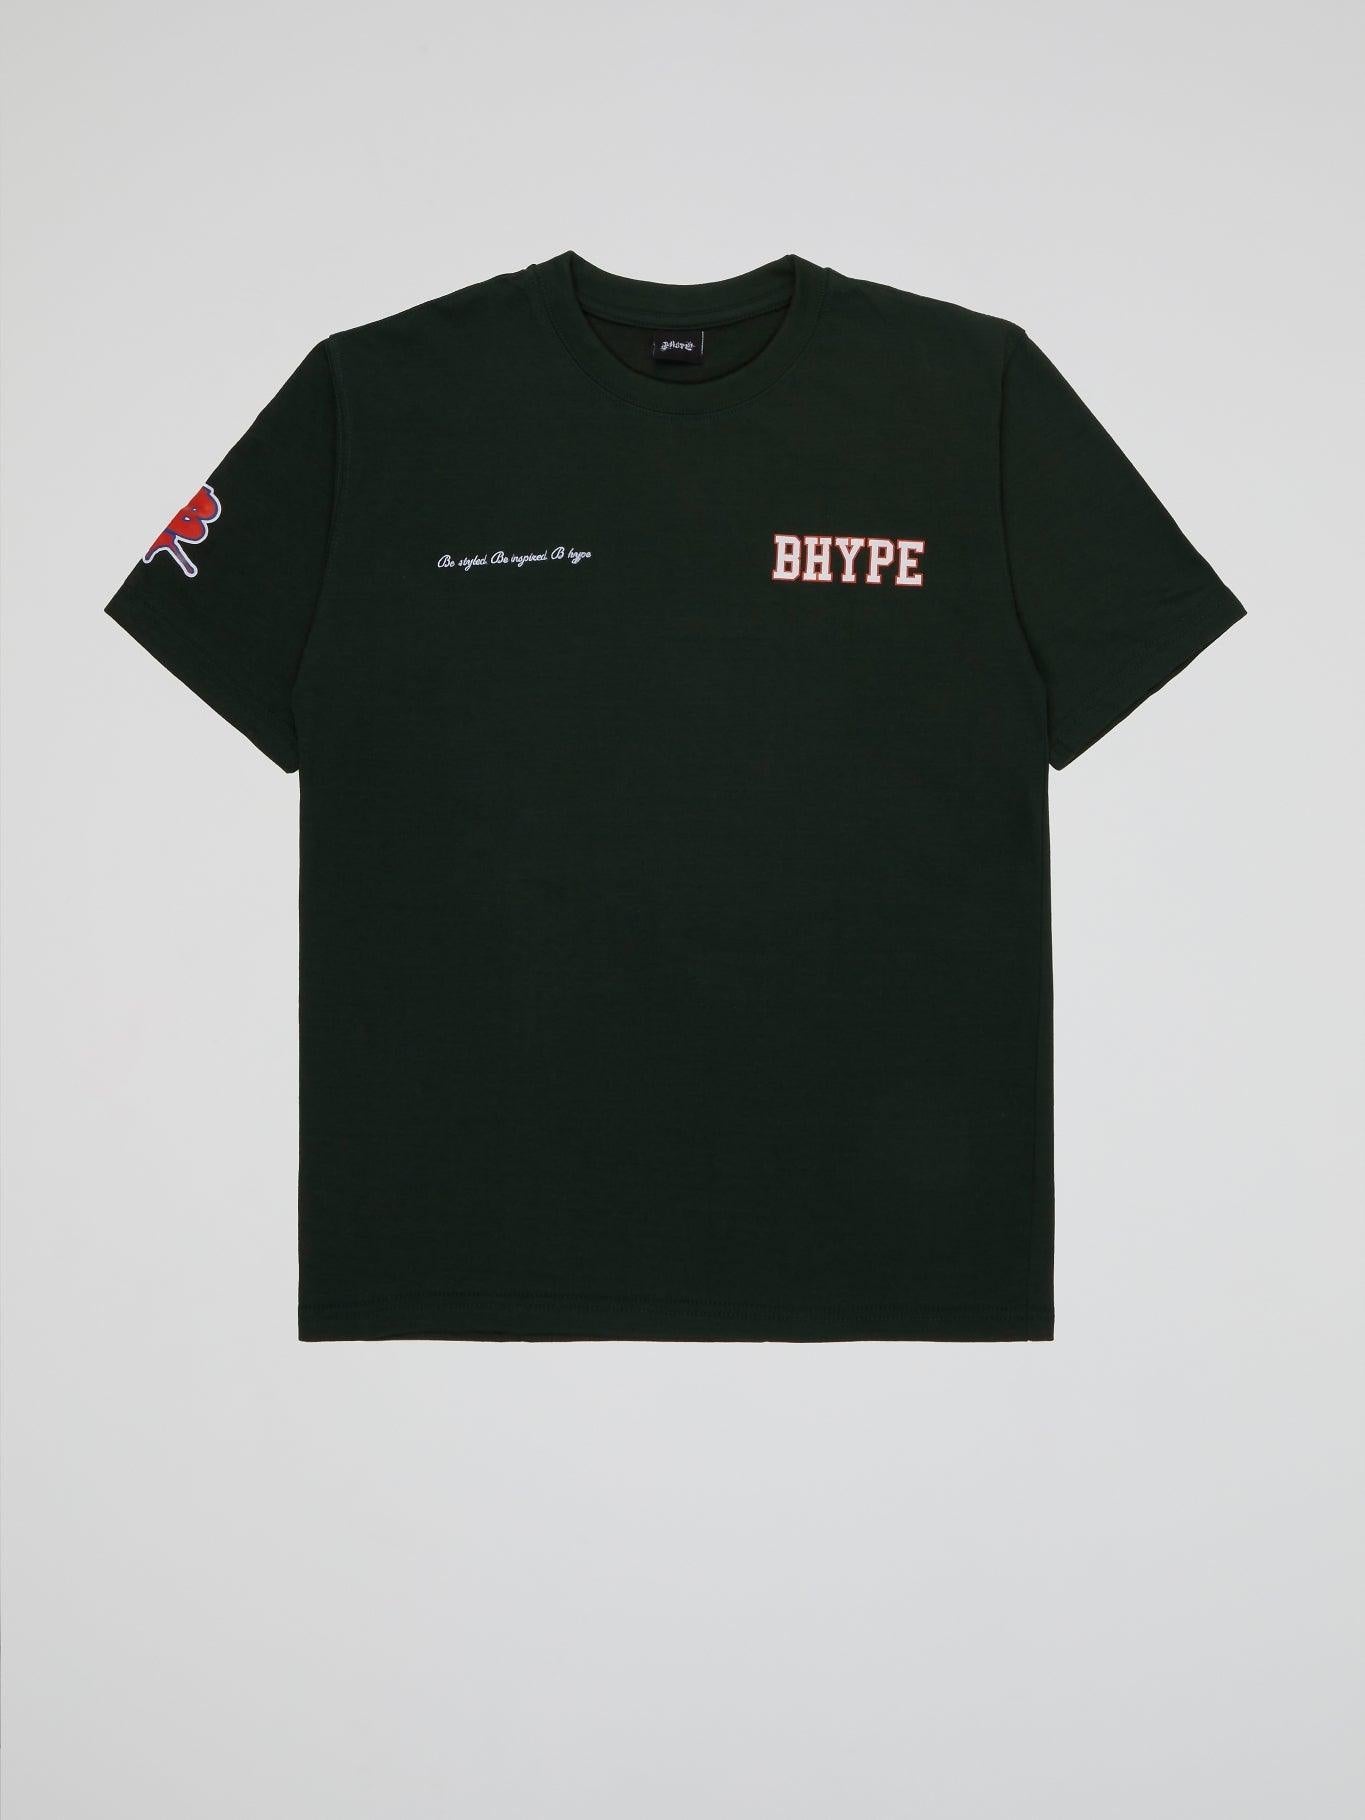 BHYPE VARSITY COLLECTION T-SHIRT GREEN - B-Hype Society